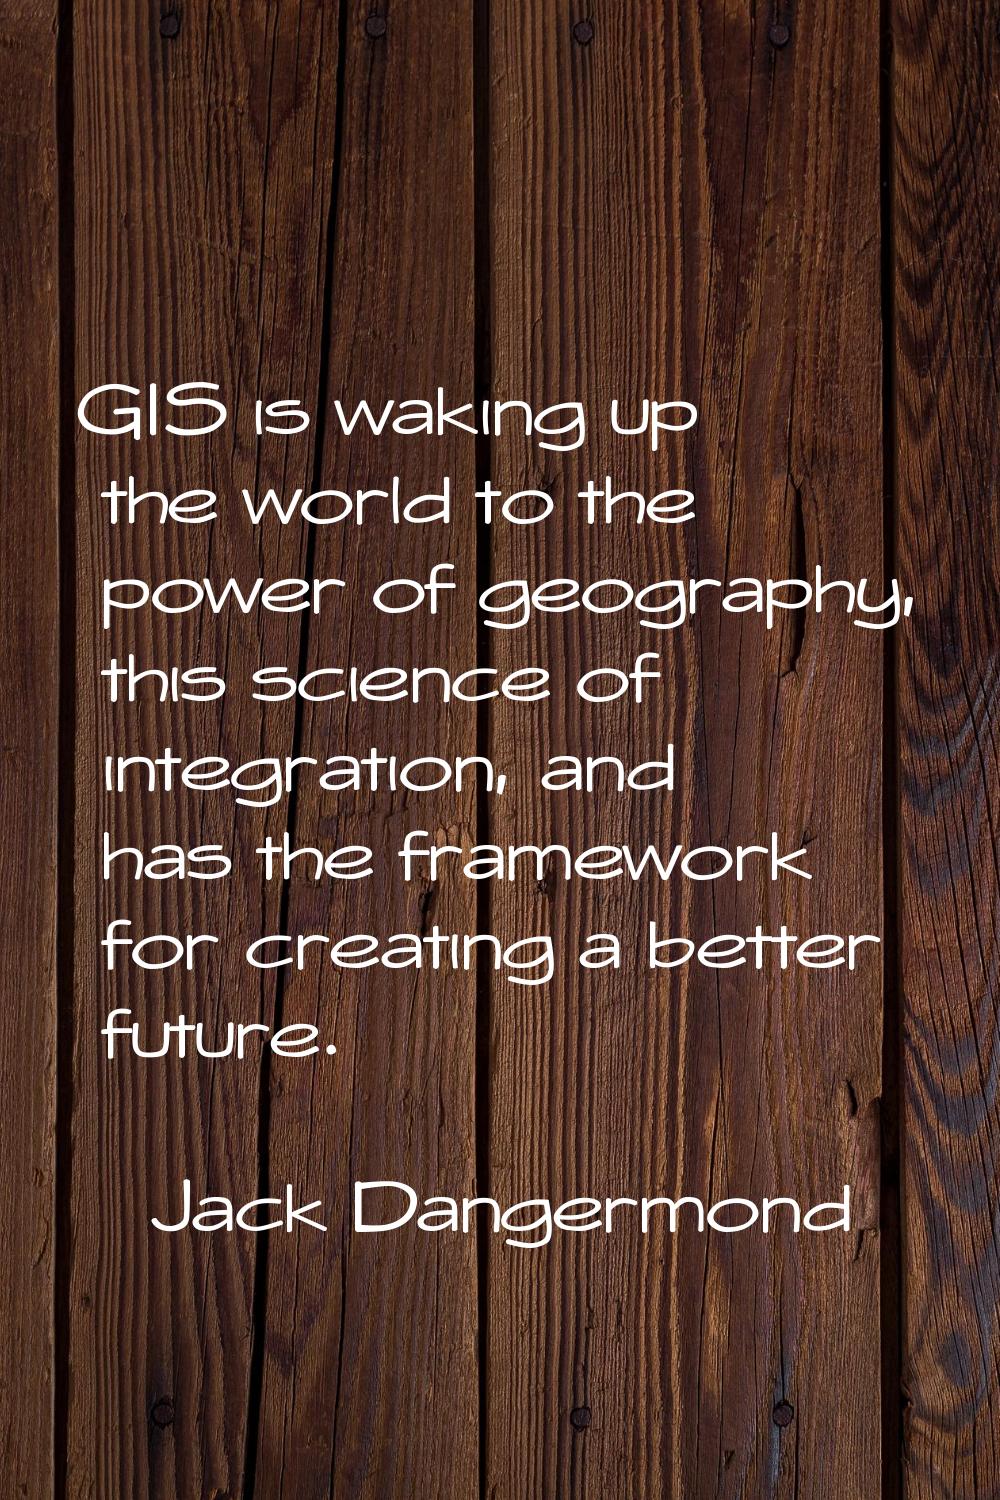 GIS is waking up the world to the power of geography, this science of integration, and has the fram